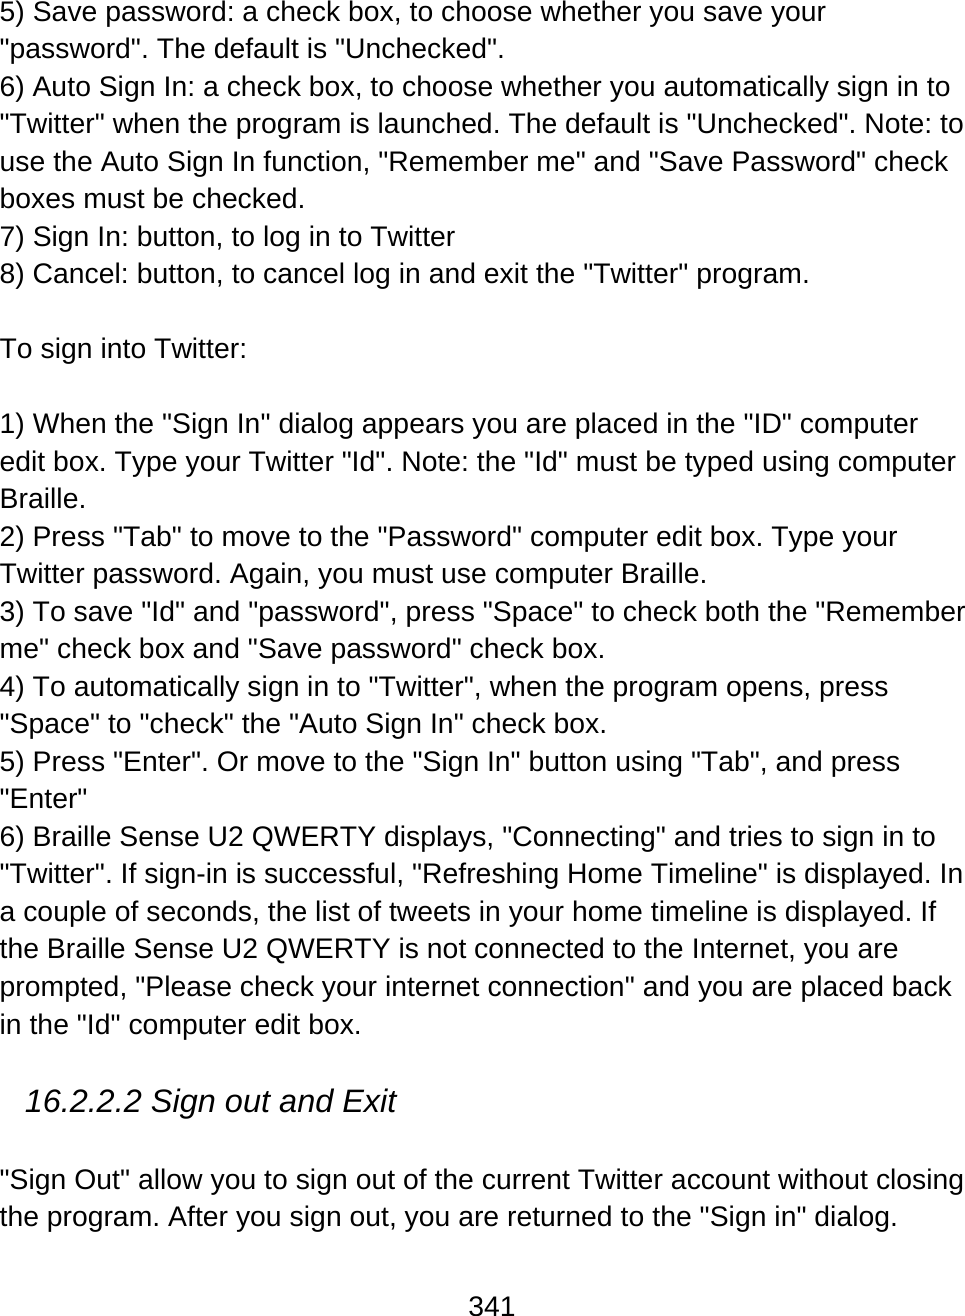 341  5) Save password: a check box, to choose whether you save your &quot;password&quot;. The default is &quot;Unchecked&quot;. 6) Auto Sign In: a check box, to choose whether you automatically sign in to &quot;Twitter&quot; when the program is launched. The default is &quot;Unchecked&quot;. Note: to use the Auto Sign In function, &quot;Remember me&quot; and &quot;Save Password&quot; check boxes must be checked.  7) Sign In: button, to log in to Twitter 8) Cancel: button, to cancel log in and exit the &quot;Twitter&quot; program.  To sign into Twitter:  1) When the &quot;Sign In&quot; dialog appears you are placed in the &quot;ID&quot; computer edit box. Type your Twitter &quot;Id&quot;. Note: the &quot;Id&quot; must be typed using computer Braille. 2) Press &quot;Tab&quot; to move to the &quot;Password&quot; computer edit box. Type your Twitter password. Again, you must use computer Braille.  3) To save &quot;Id&quot; and &quot;password&quot;, press &quot;Space&quot; to check both the &quot;Remember me&quot; check box and &quot;Save password&quot; check box. 4) To automatically sign in to &quot;Twitter&quot;, when the program opens, press &quot;Space&quot; to &quot;check&quot; the &quot;Auto Sign In&quot; check box.  5) Press &quot;Enter&quot;. Or move to the &quot;Sign In&quot; button using &quot;Tab&quot;, and press &quot;Enter&quot; 6) Braille Sense U2 QWERTY displays, &quot;Connecting&quot; and tries to sign in to &quot;Twitter&quot;. If sign-in is successful, &quot;Refreshing Home Timeline&quot; is displayed. In a couple of seconds, the list of tweets in your home timeline is displayed. If the Braille Sense U2 QWERTY is not connected to the Internet, you are prompted, &quot;Please check your internet connection&quot; and you are placed back in the &quot;Id&quot; computer edit box.  16.2.2.2 Sign out and Exit  &quot;Sign Out&quot; allow you to sign out of the current Twitter account without closing the program. After you sign out, you are returned to the &quot;Sign in&quot; dialog. 